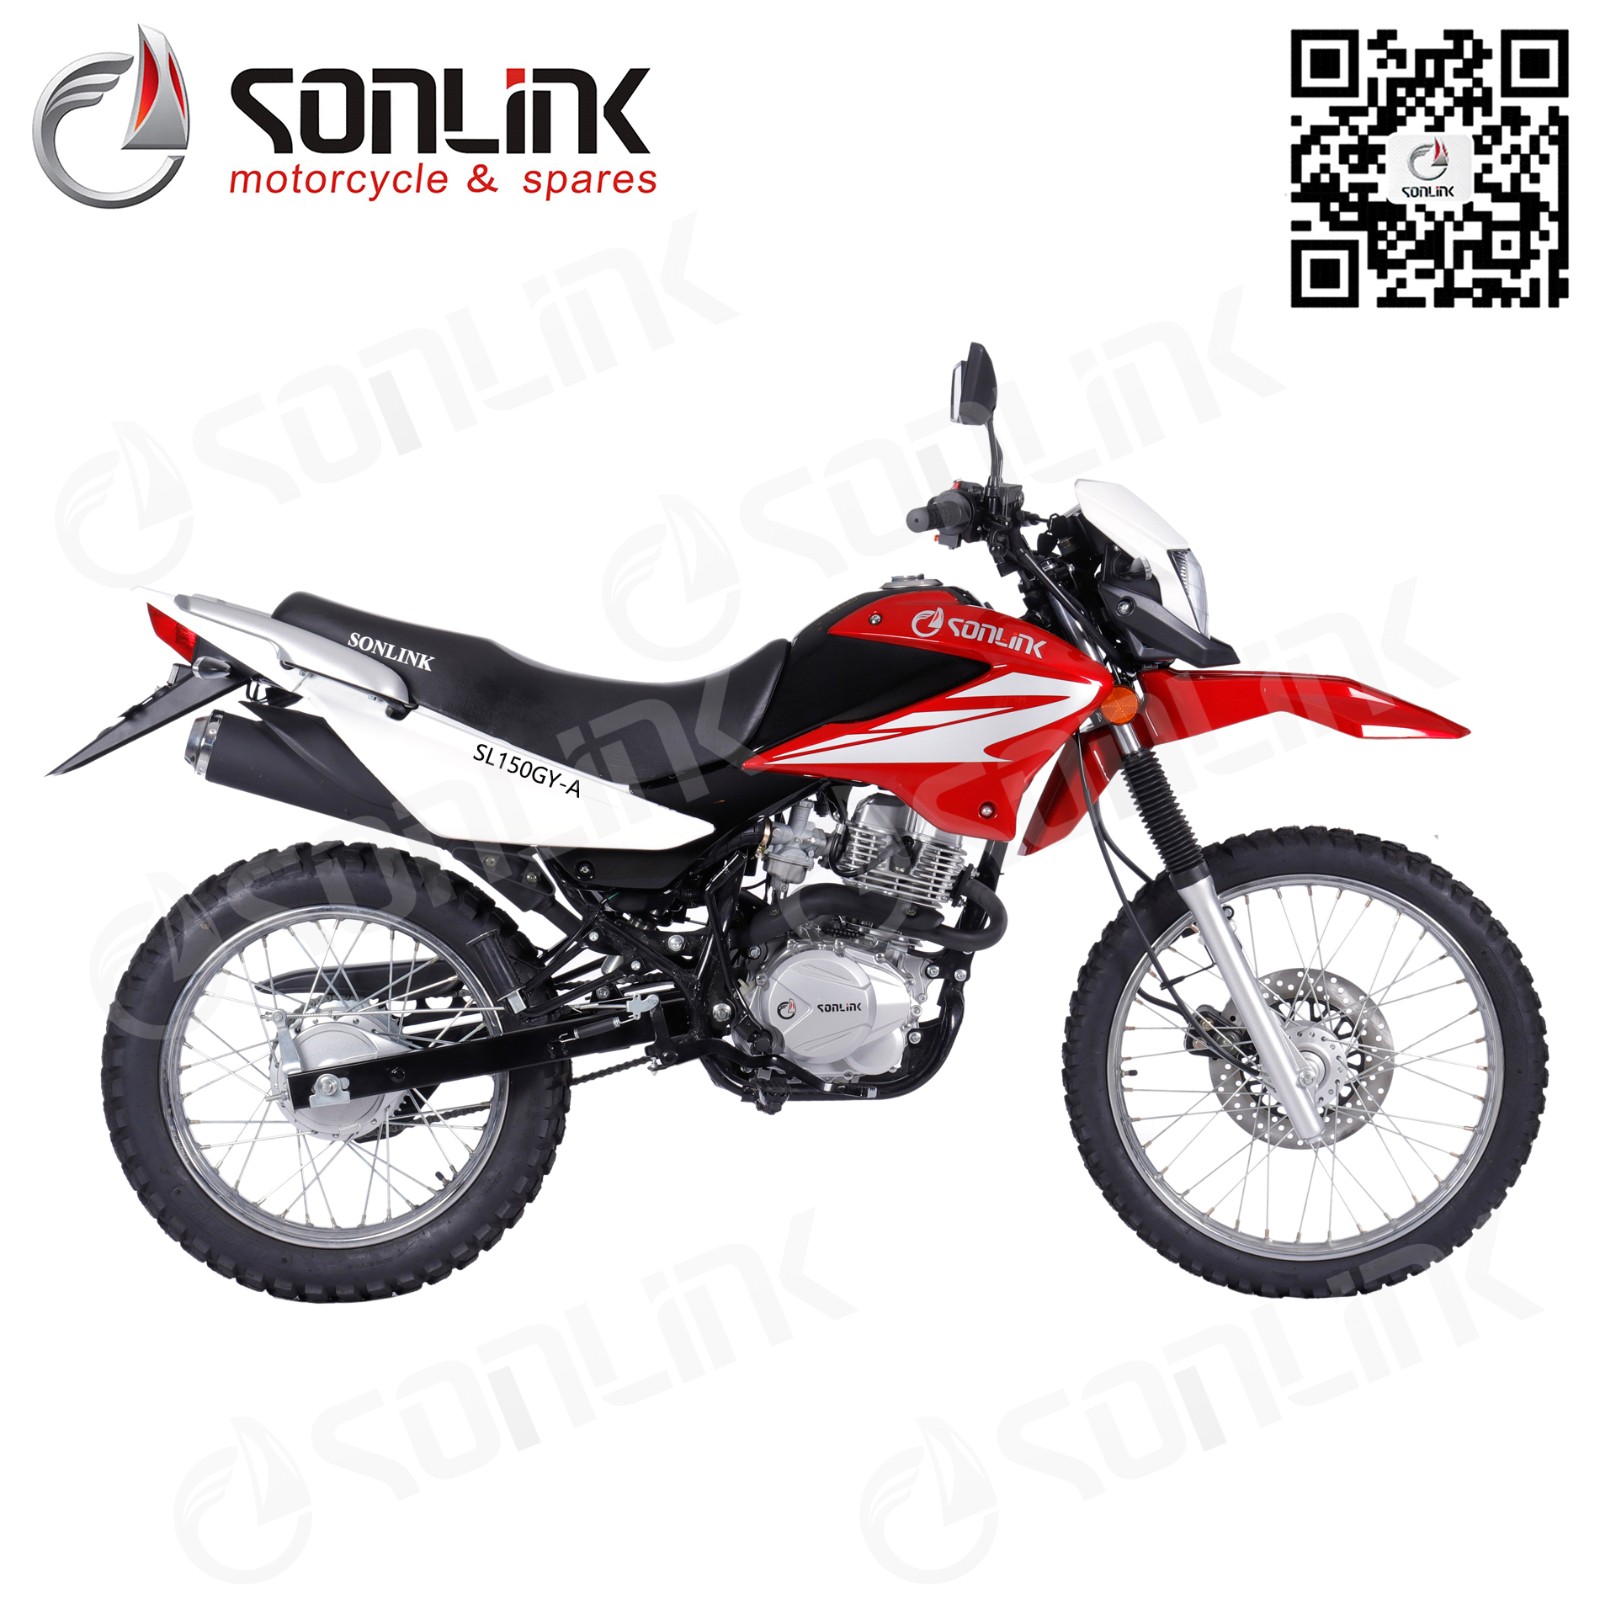 Off-road motorcycle